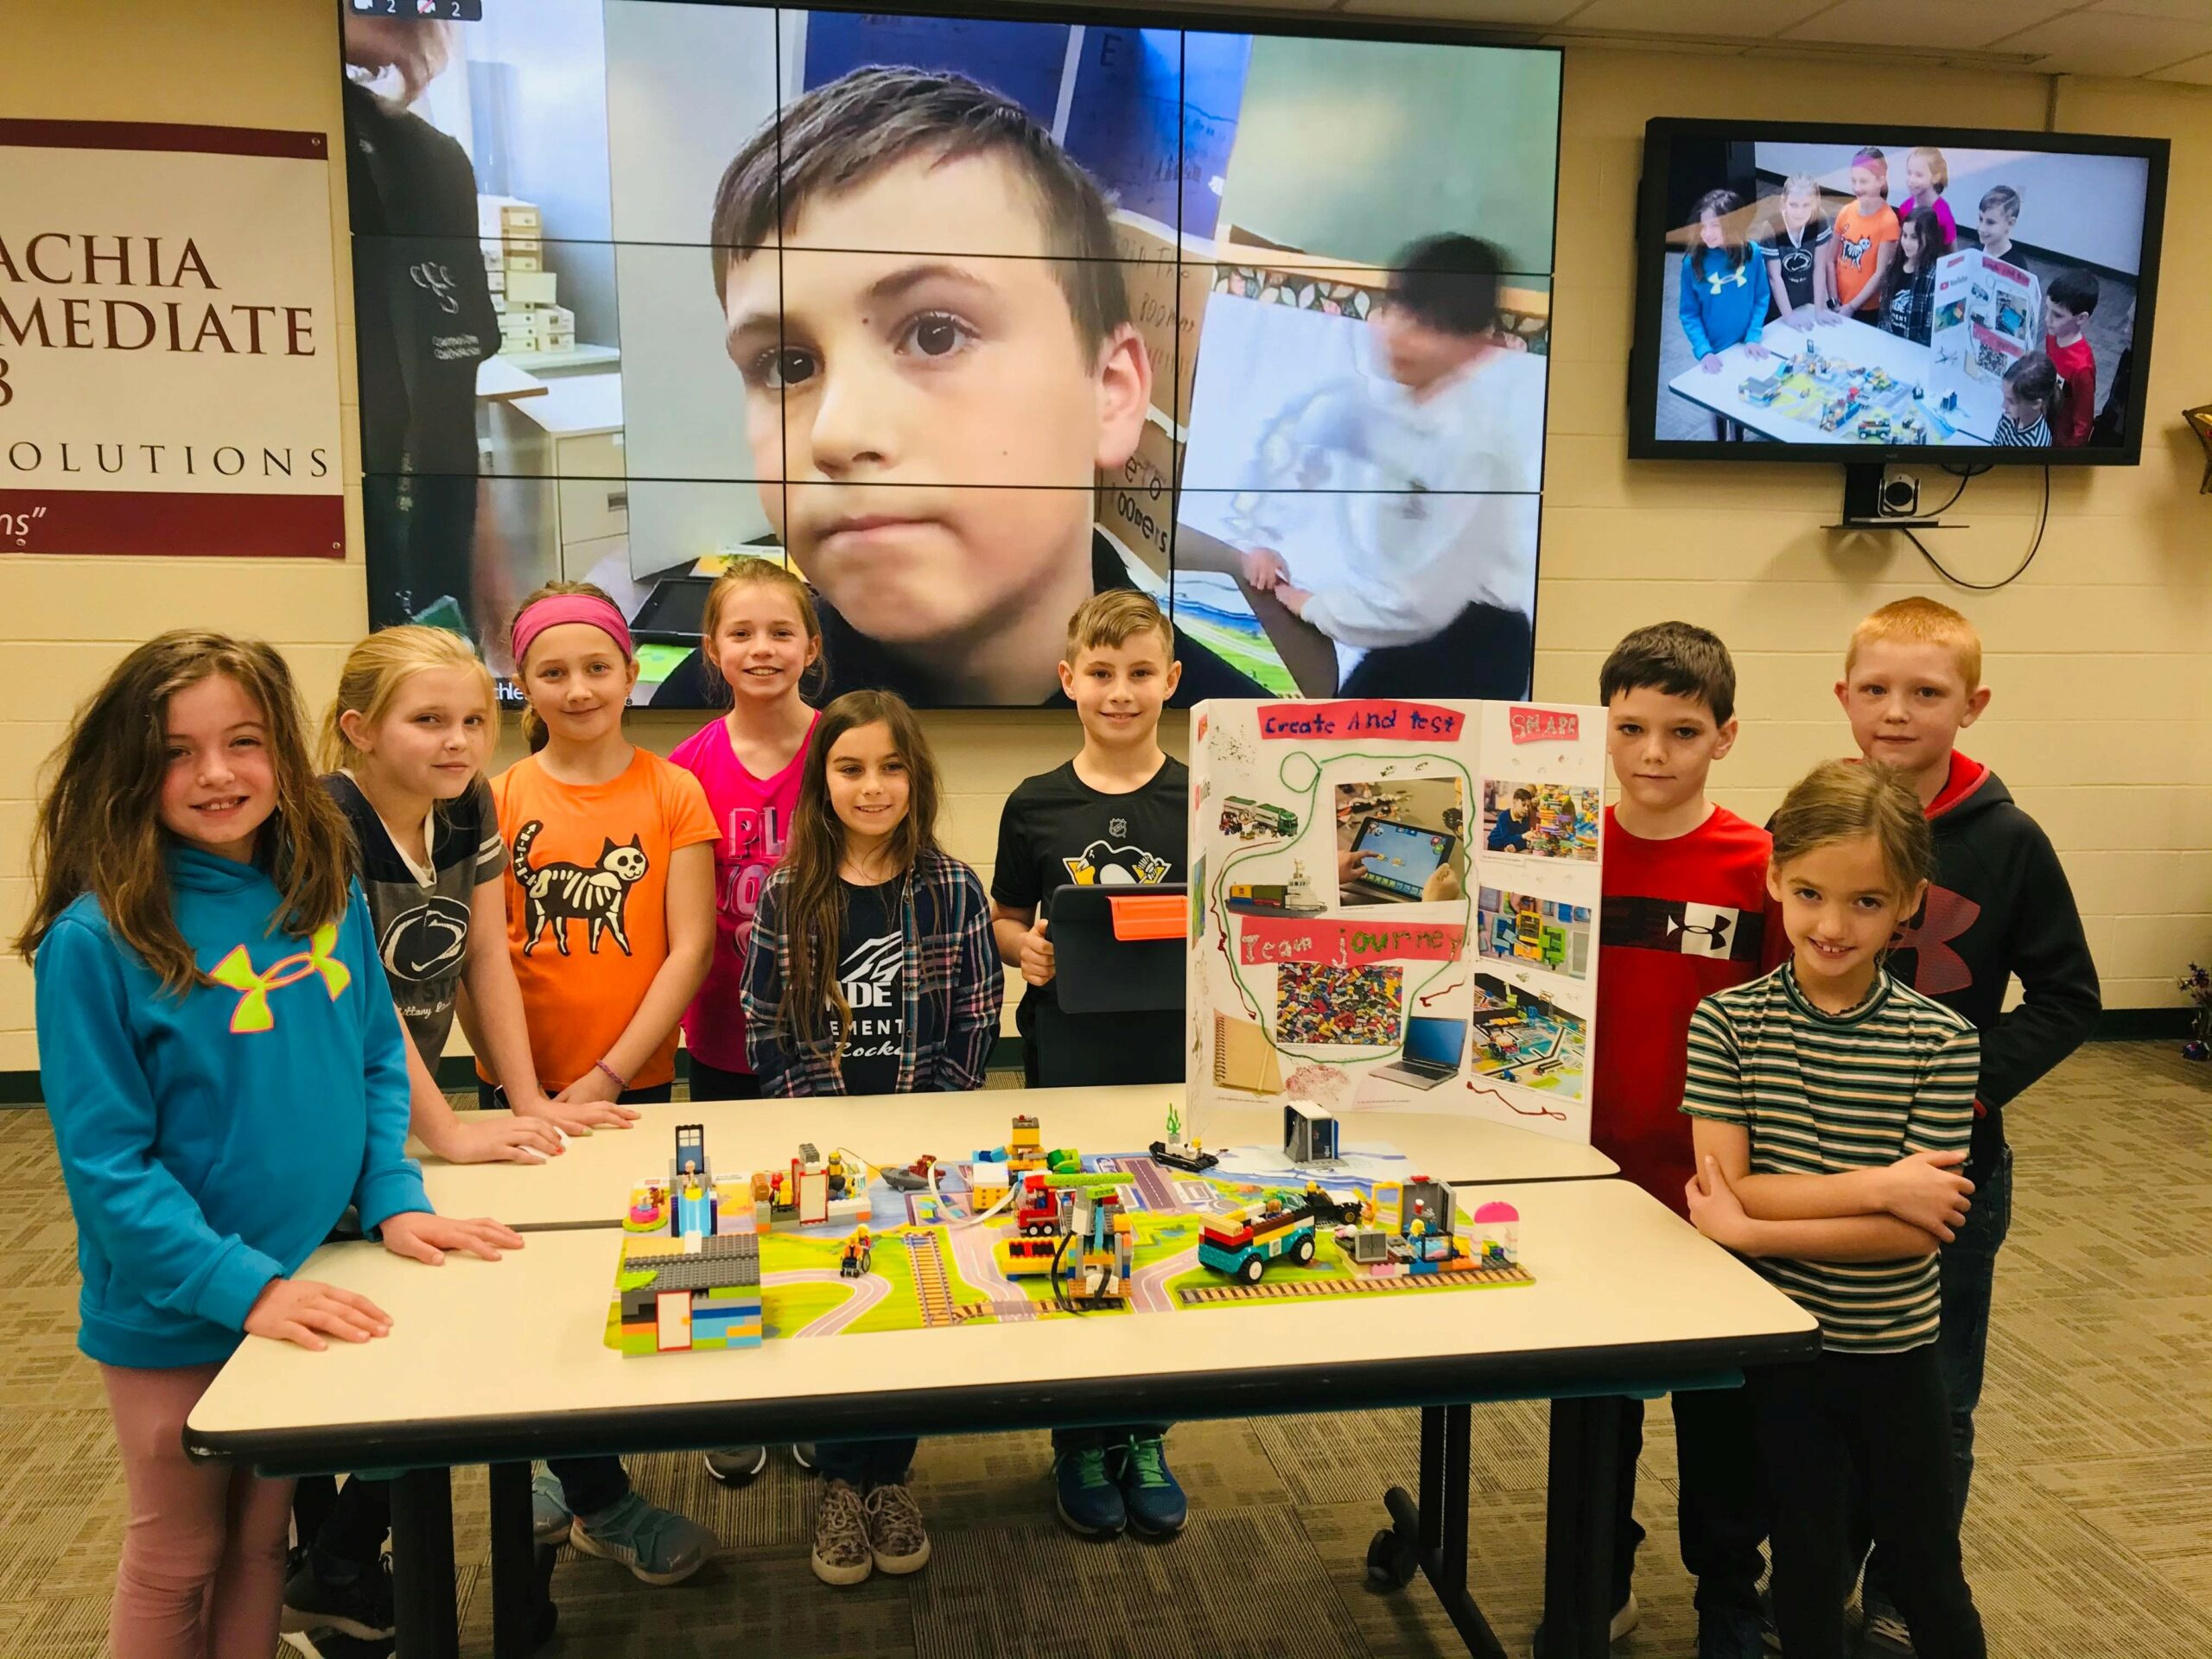 Students at a competition gather around a table with legos and a display board. Behind them, a large screen displays students virtually.